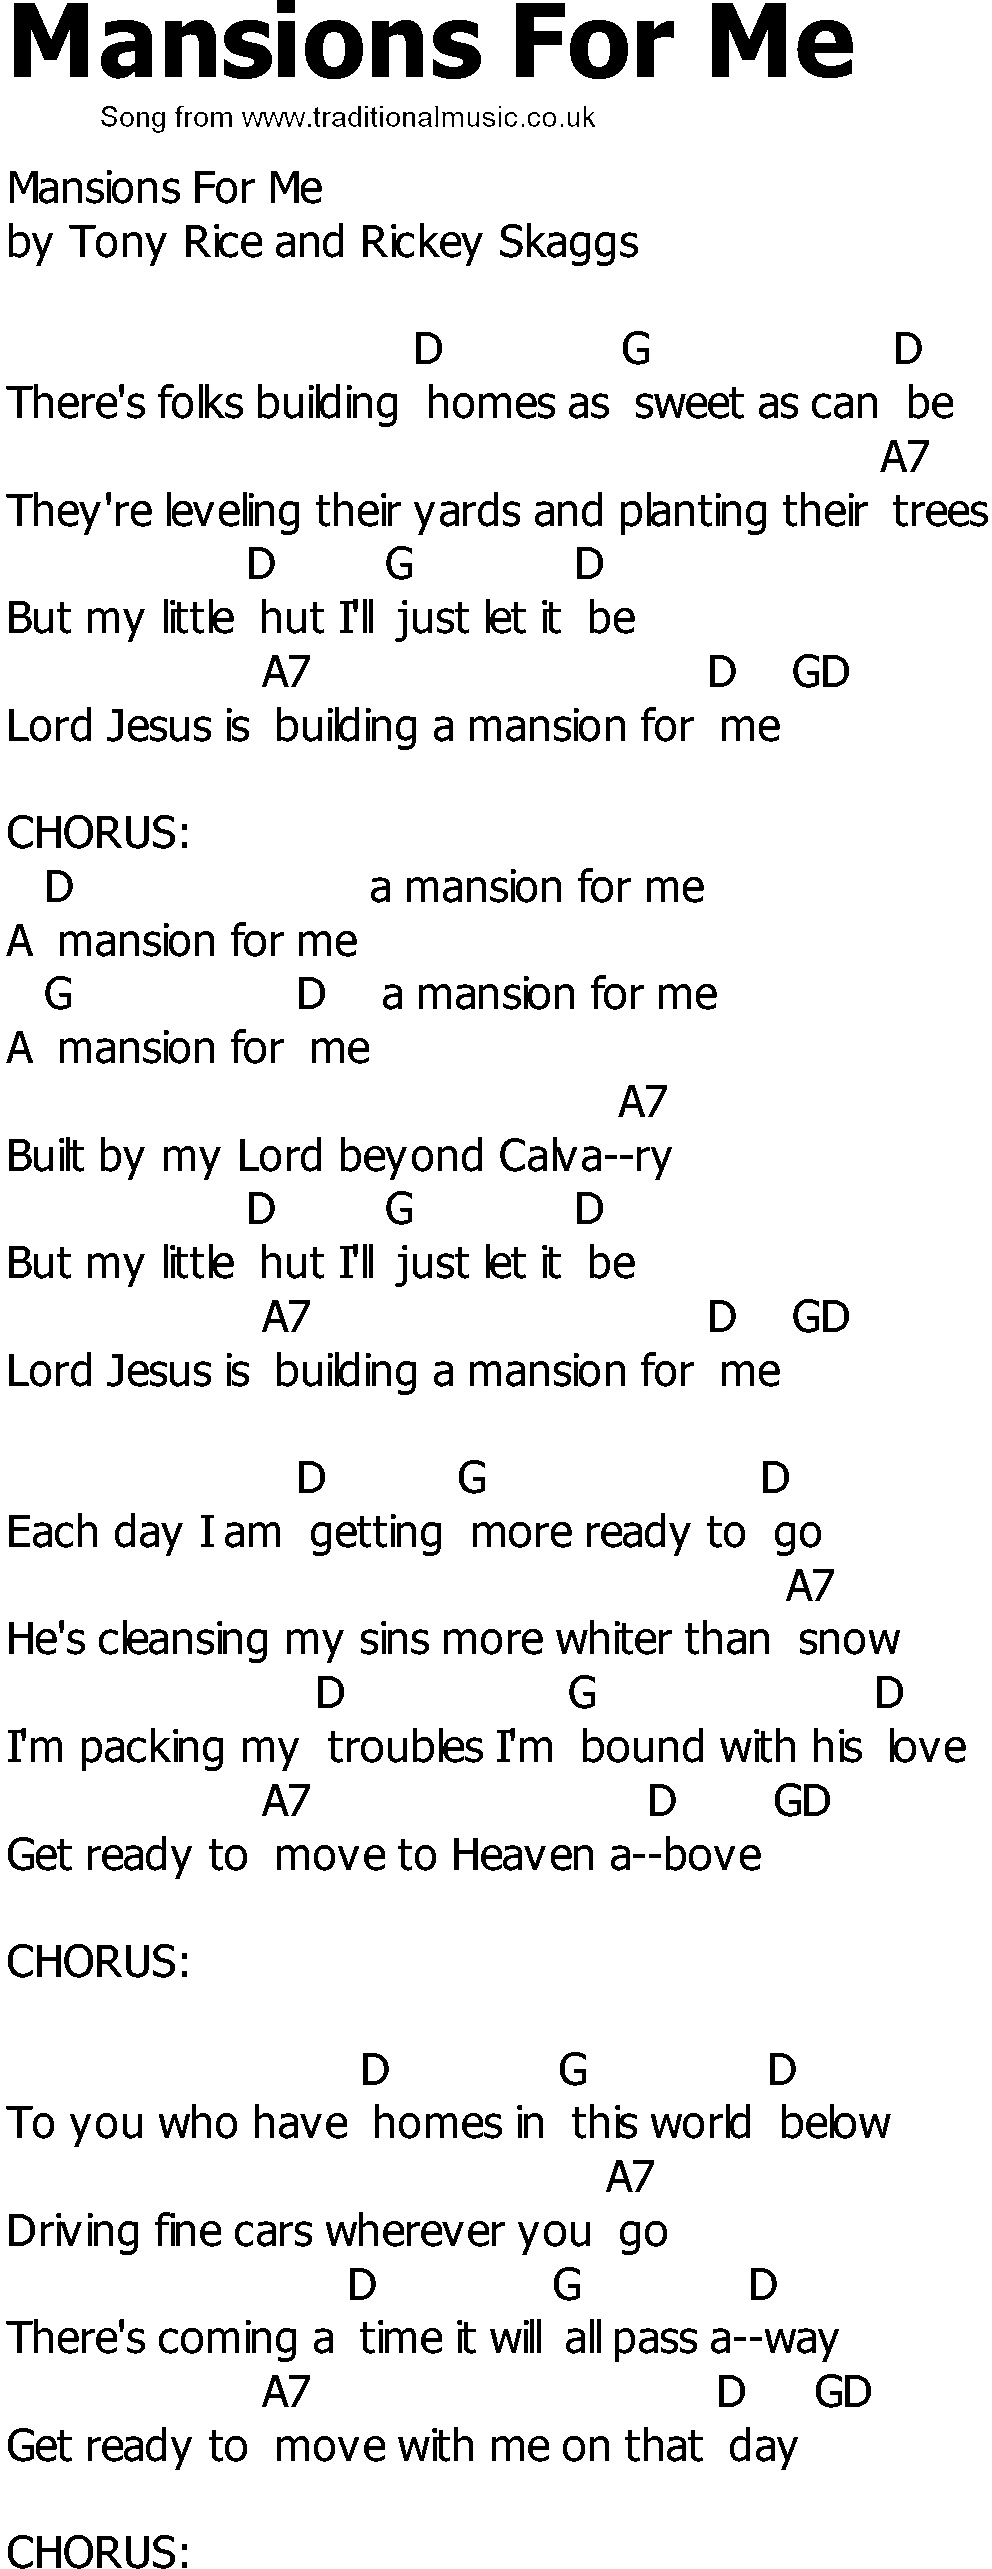 Old Country song lyrics with chords - Mansions For Me